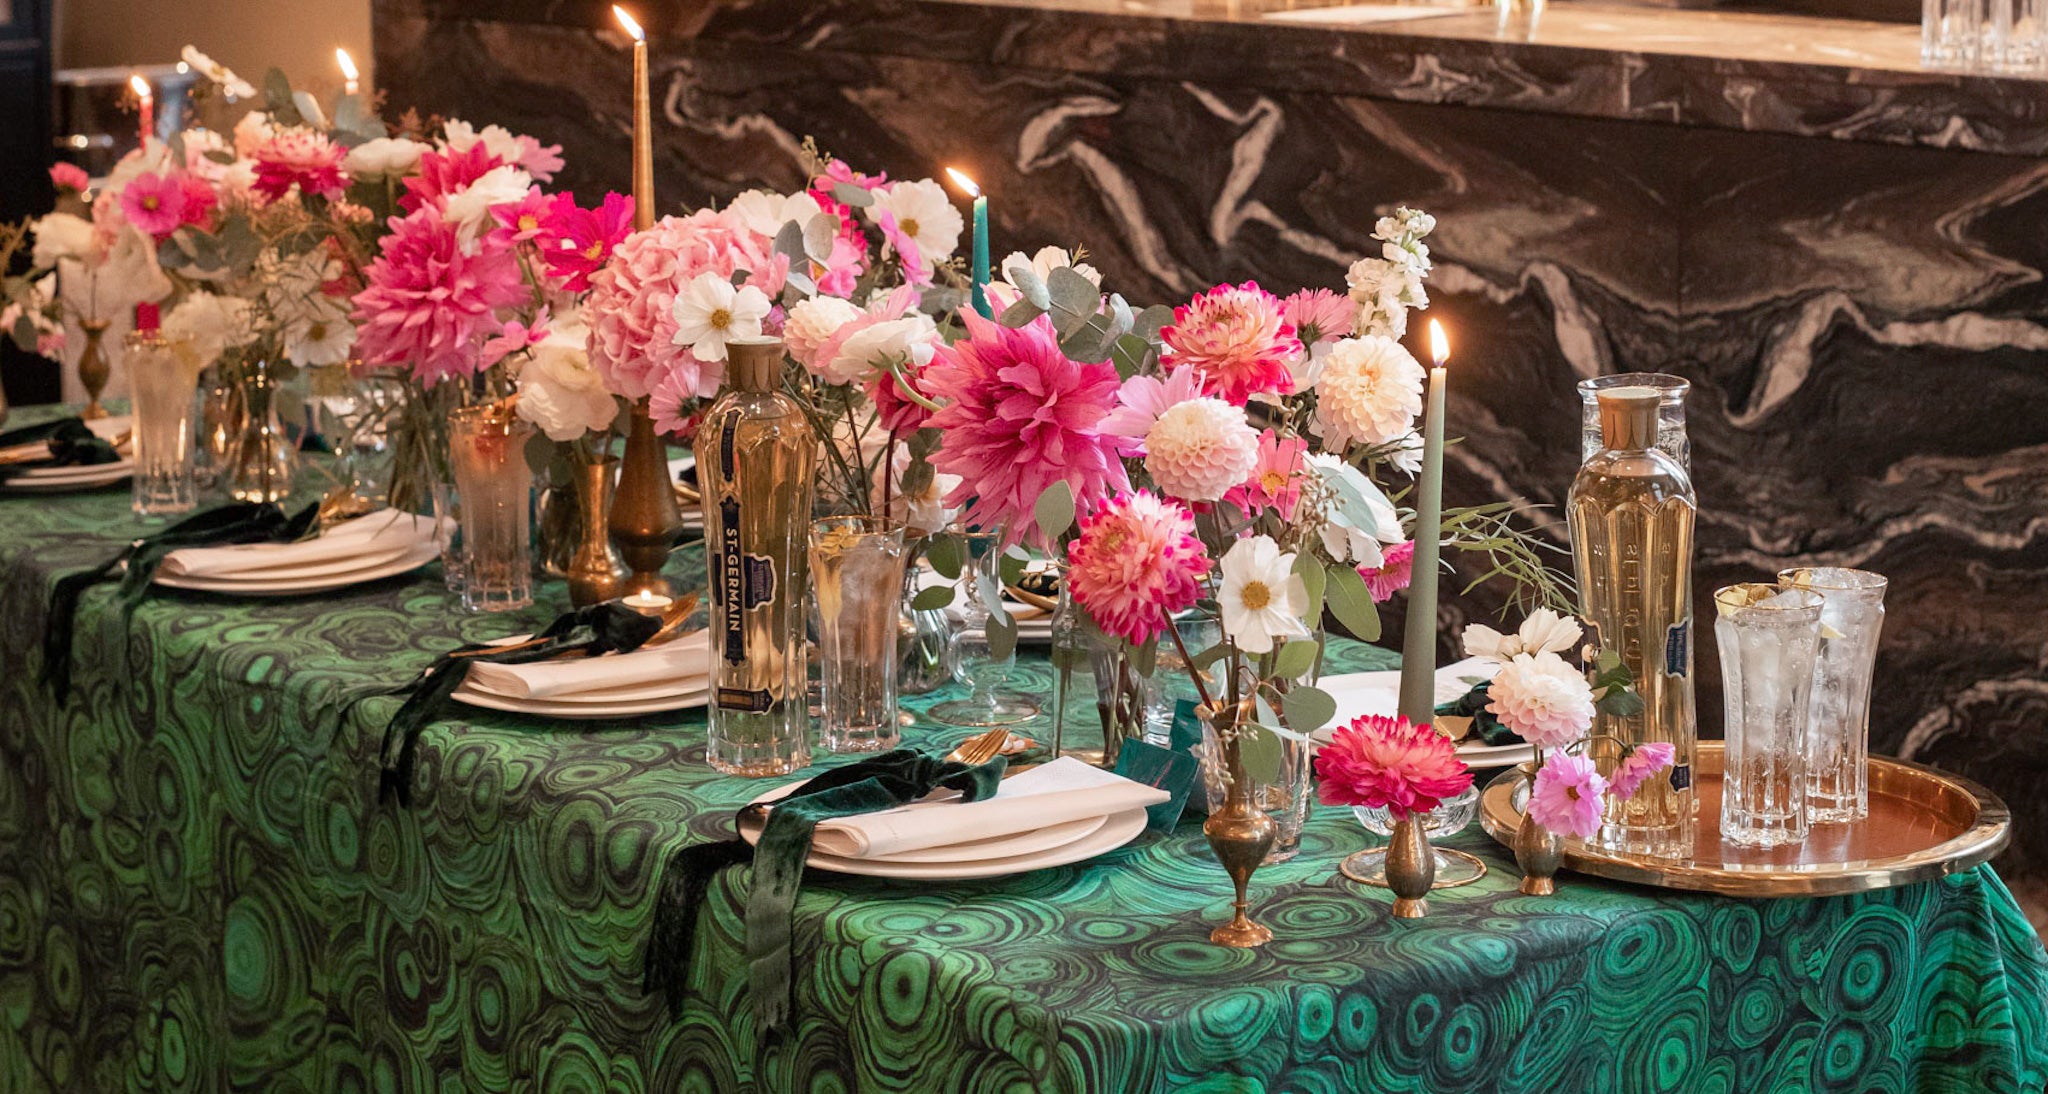 Autumn Tablescape Masterclass With ST~GERMAIN